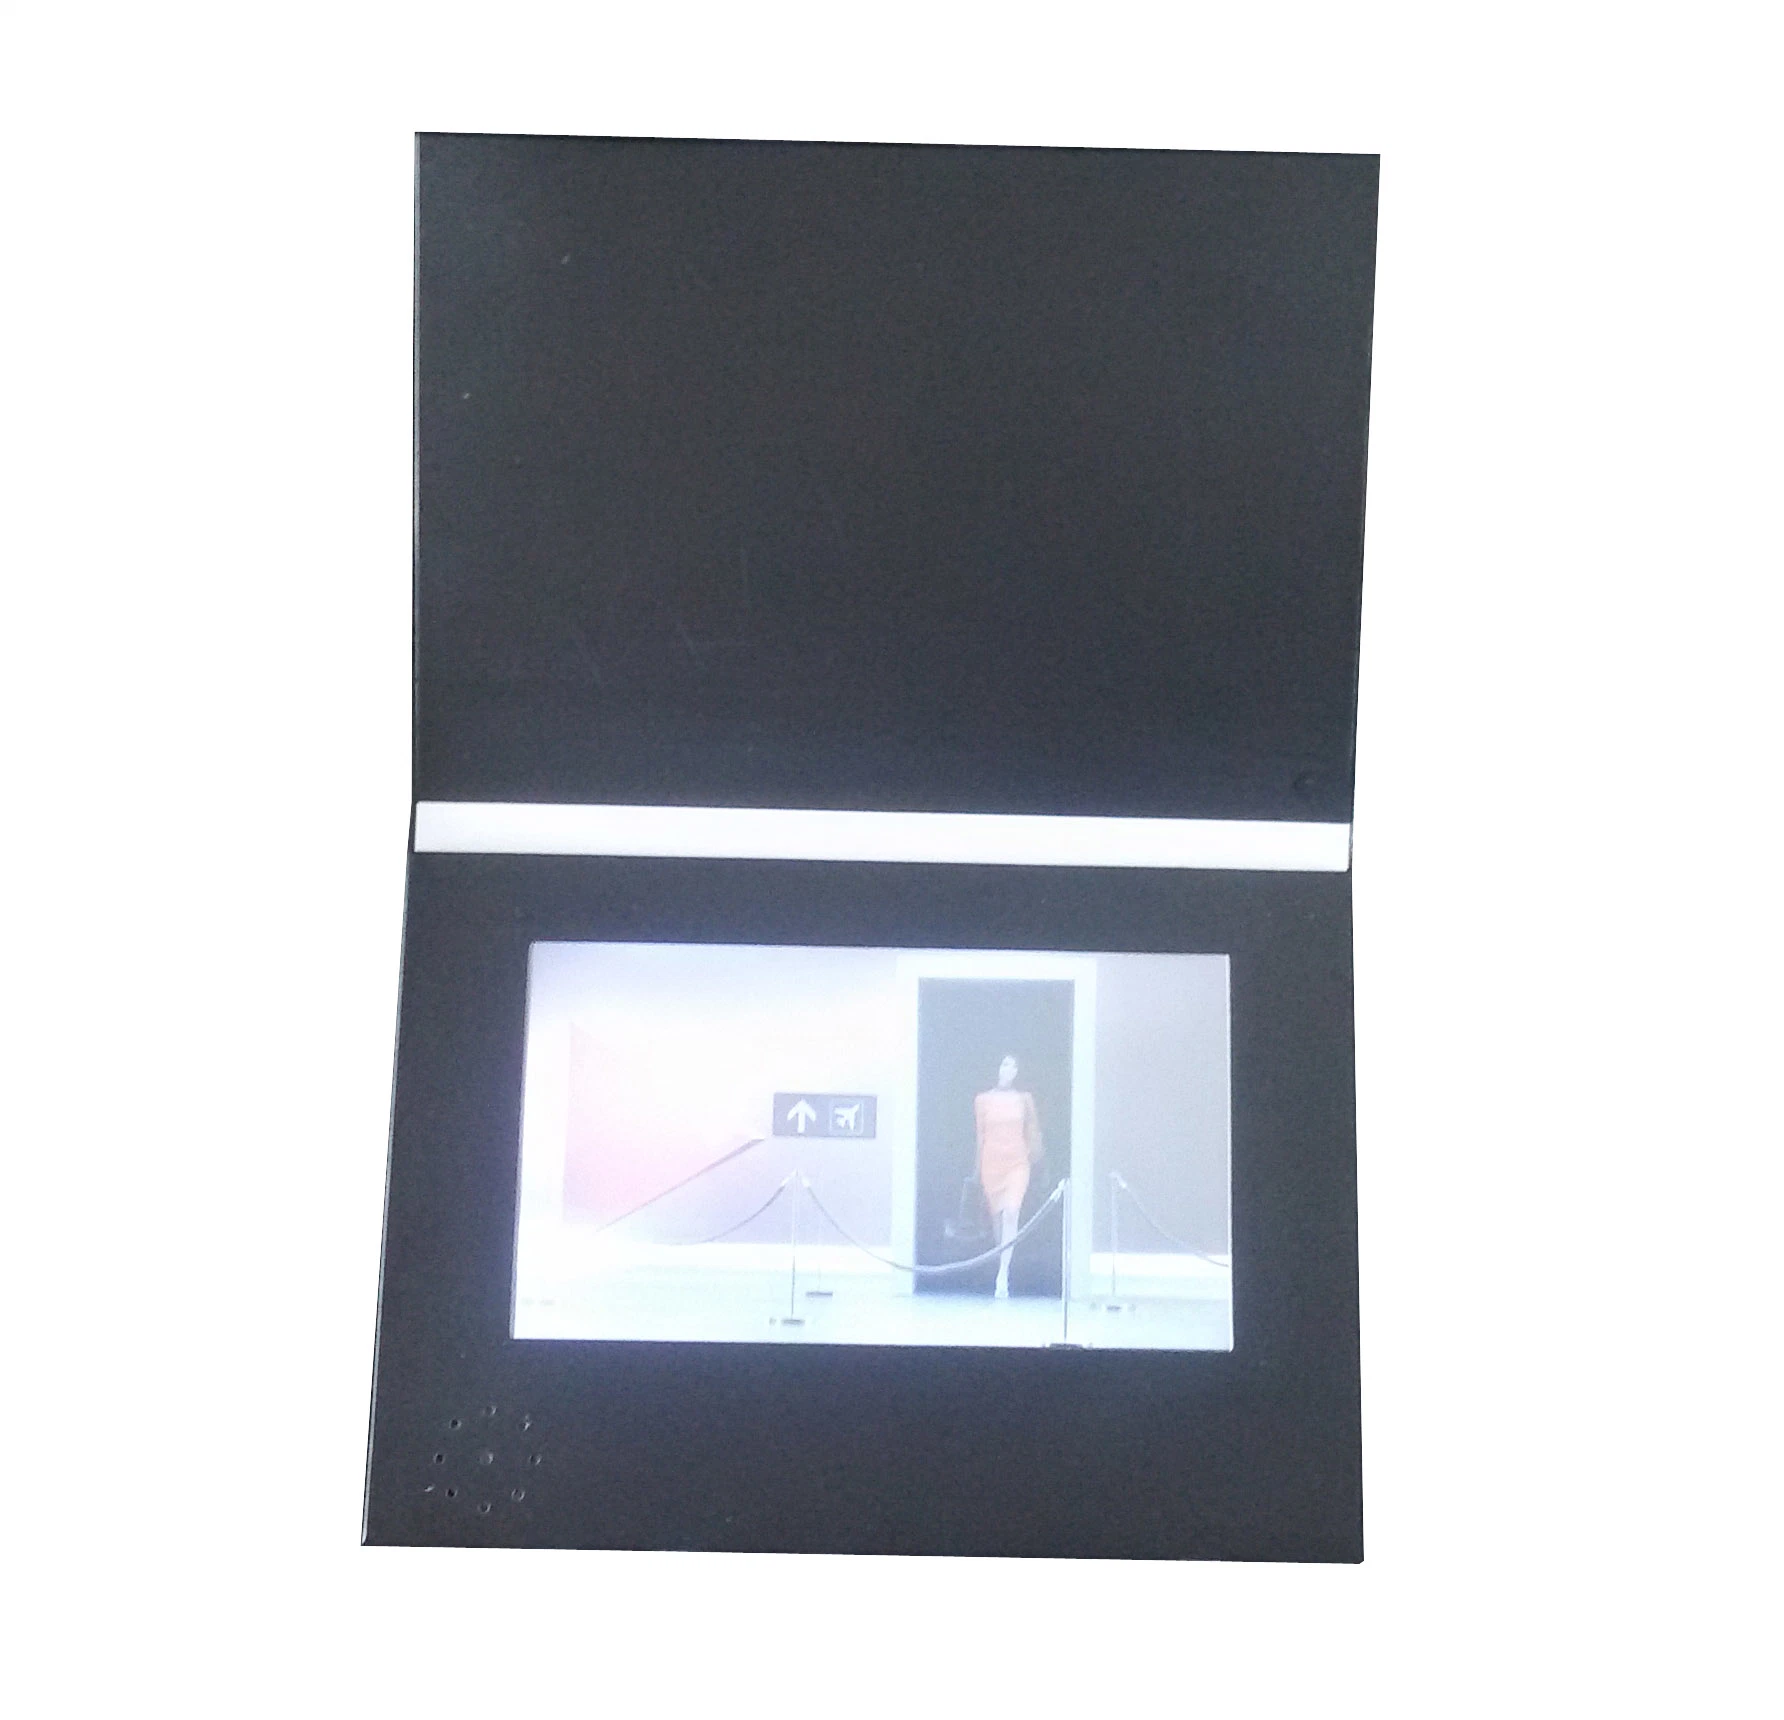 Promotion Gift 7inch Video Greeting Card